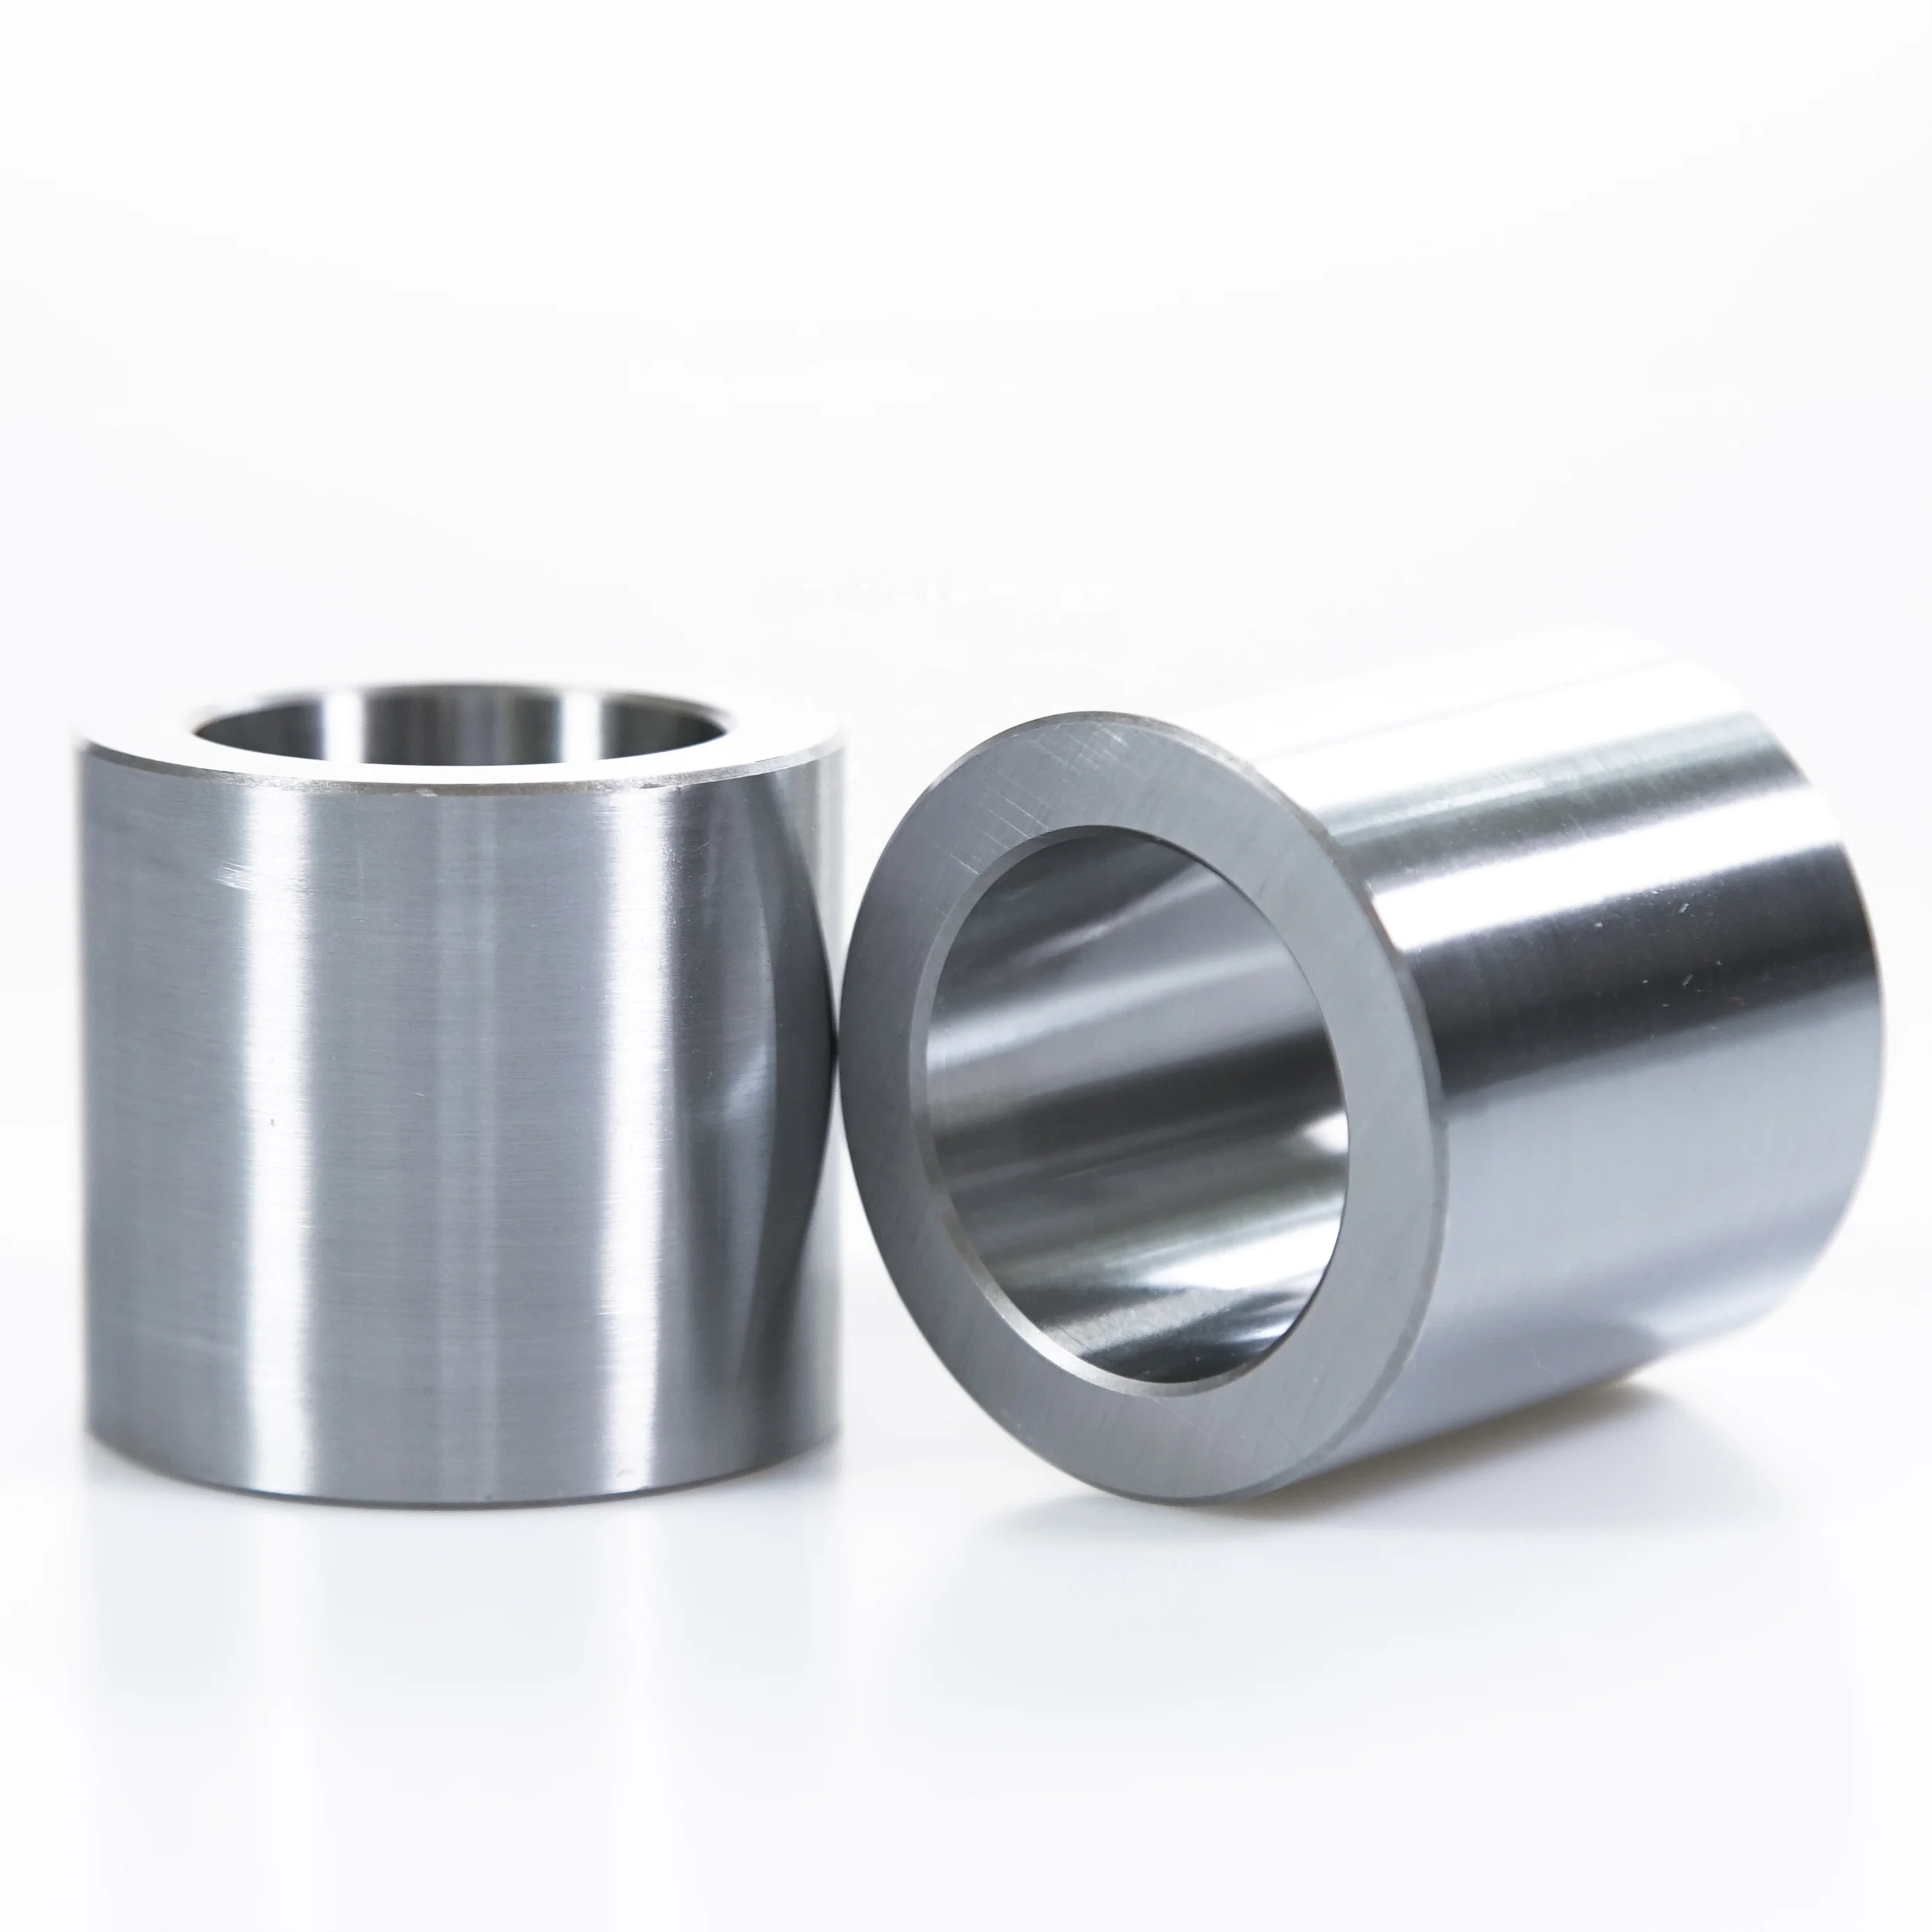 
China manufacturers through ISO 9001bushings high precision, high quality, low price axle sleeve 65*75*35 Support for custom 